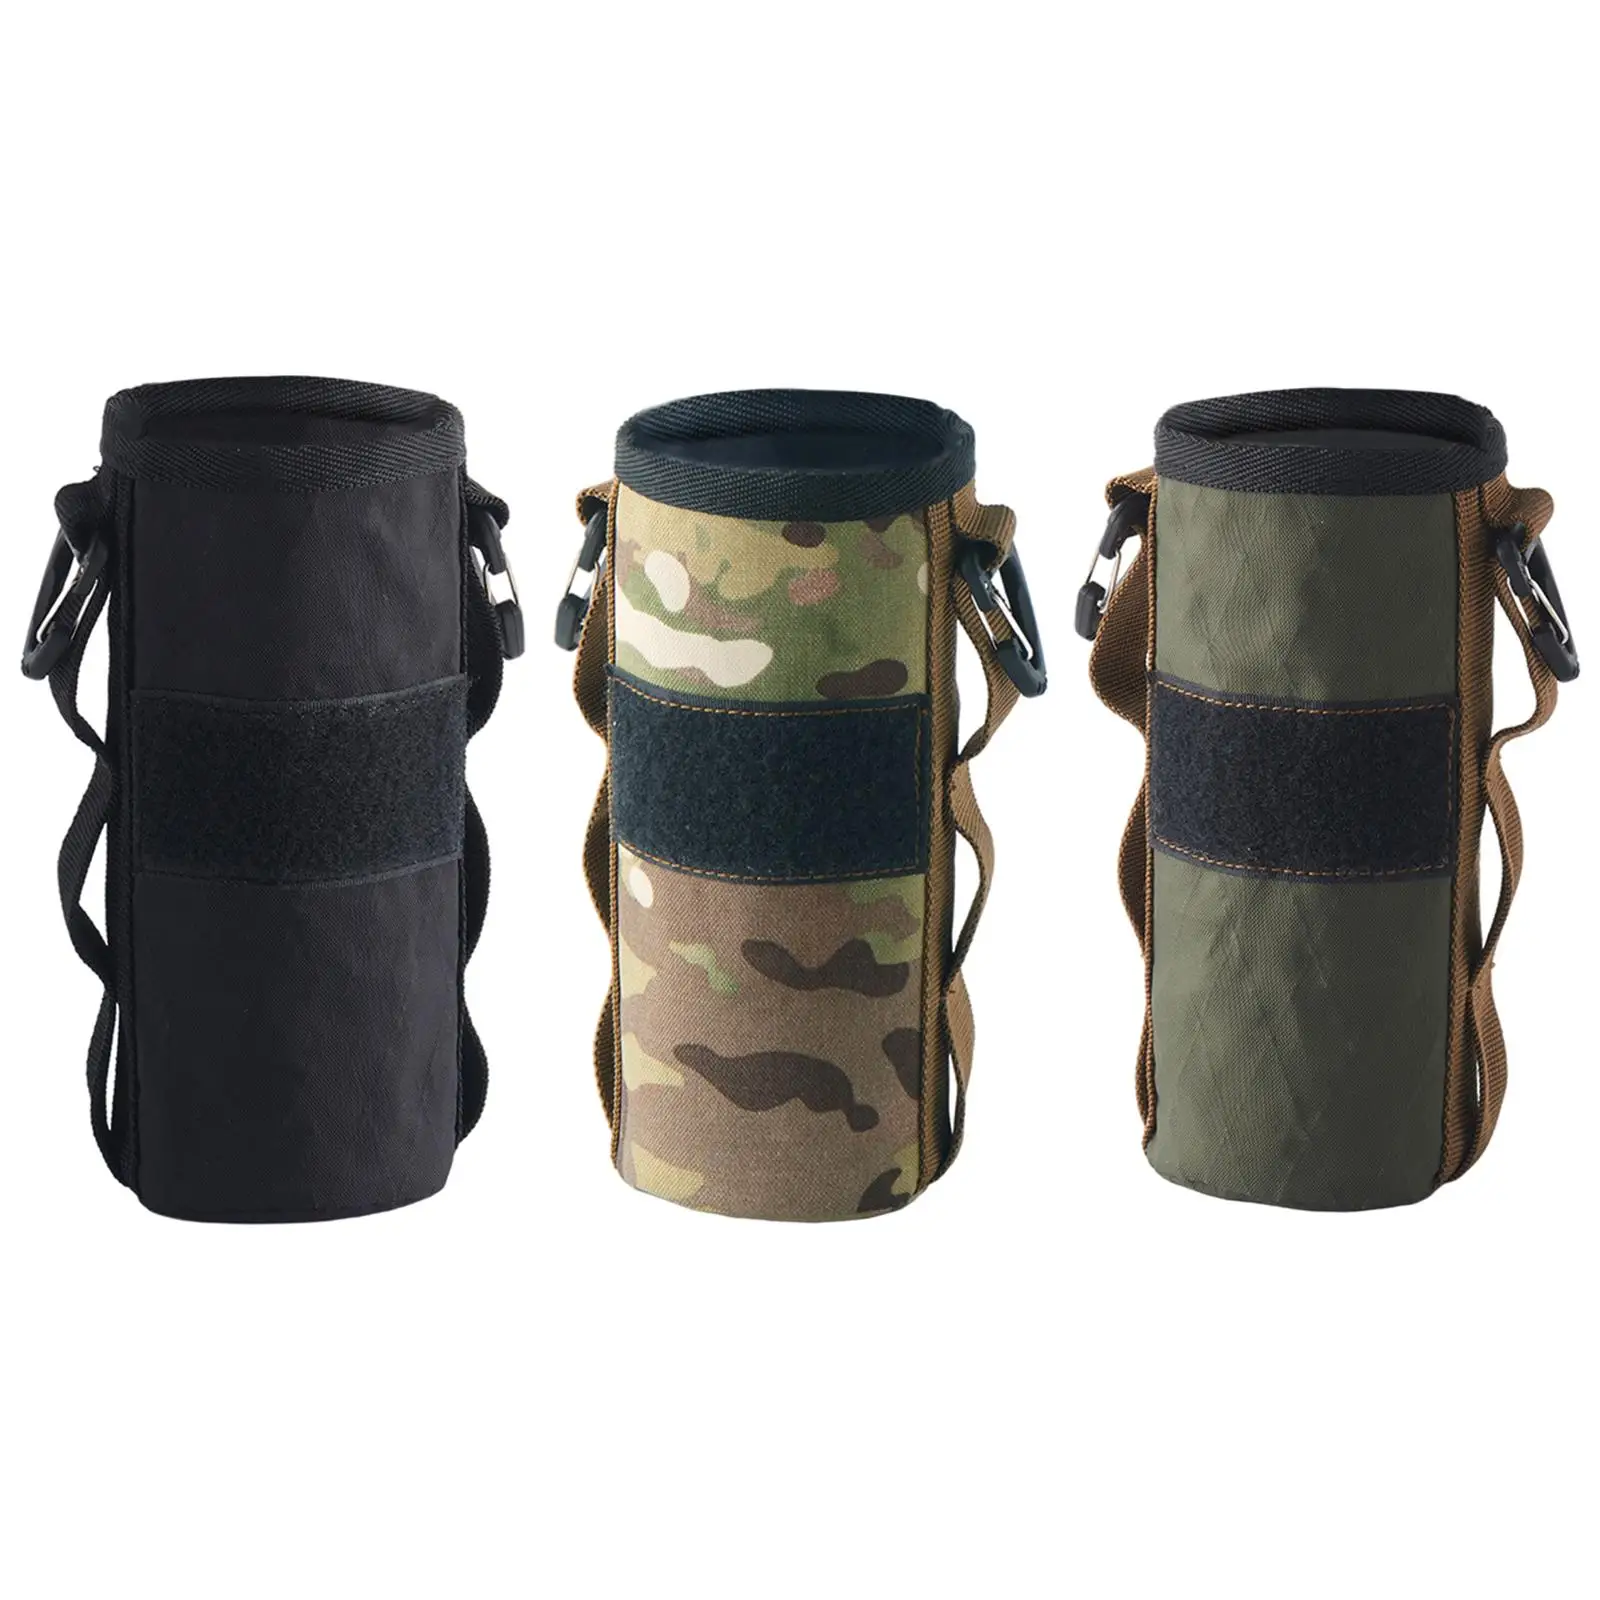 Gas Tank Protective Case Fuel Cylinder Canister Storage Cover for Camping Outdoor